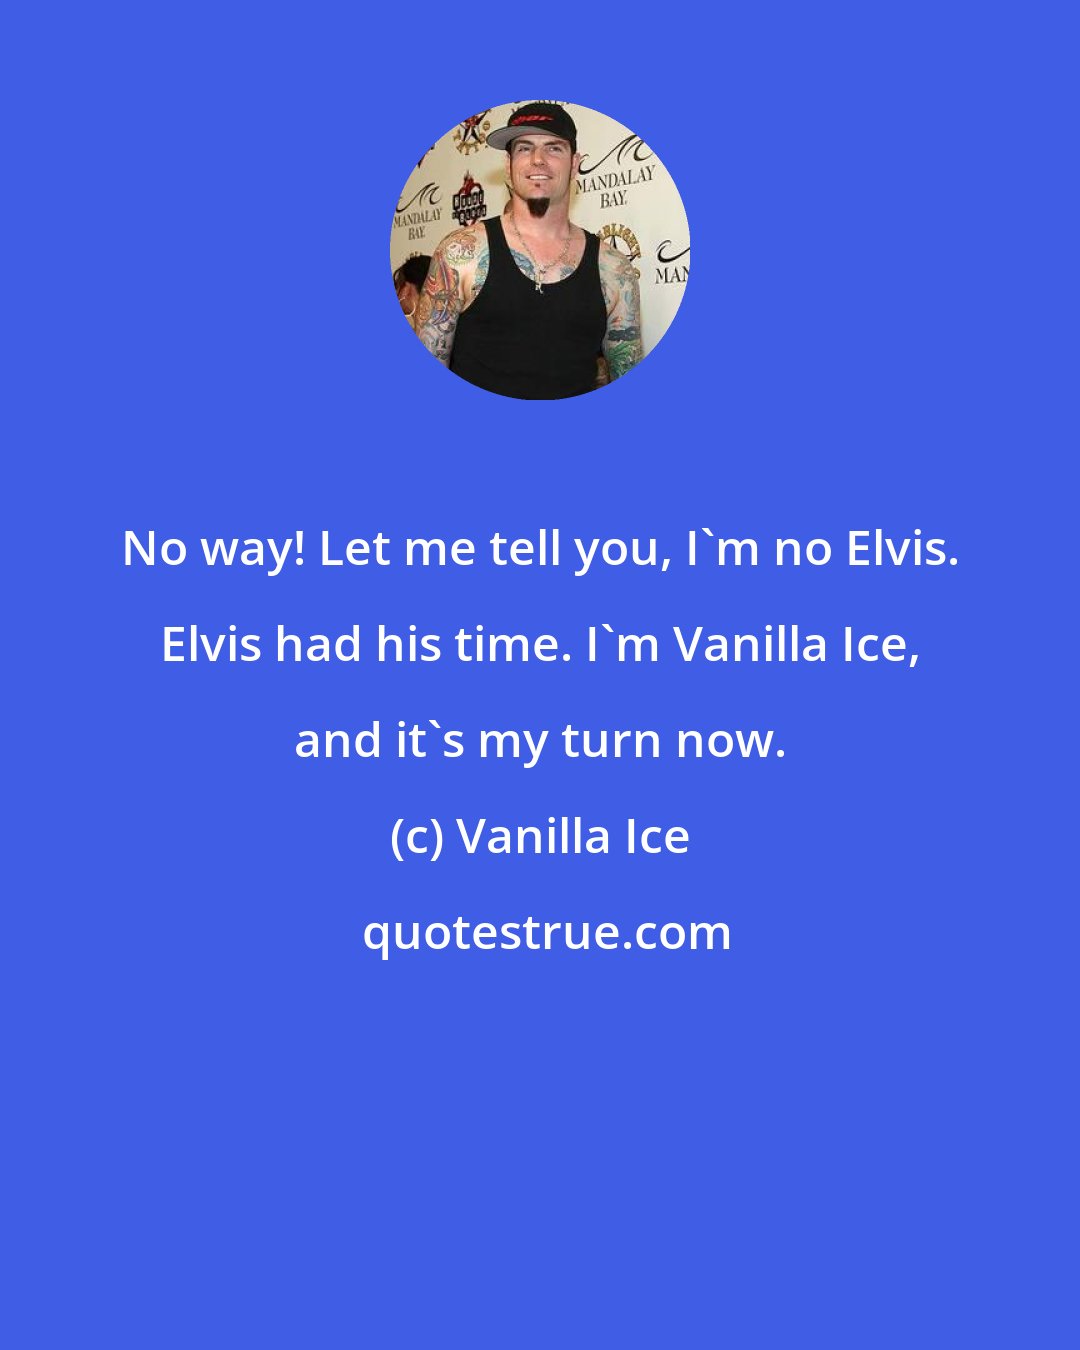 Vanilla Ice: No way! Let me tell you, I'm no Elvis. Elvis had his time. I'm Vanilla Ice, and it's my turn now.